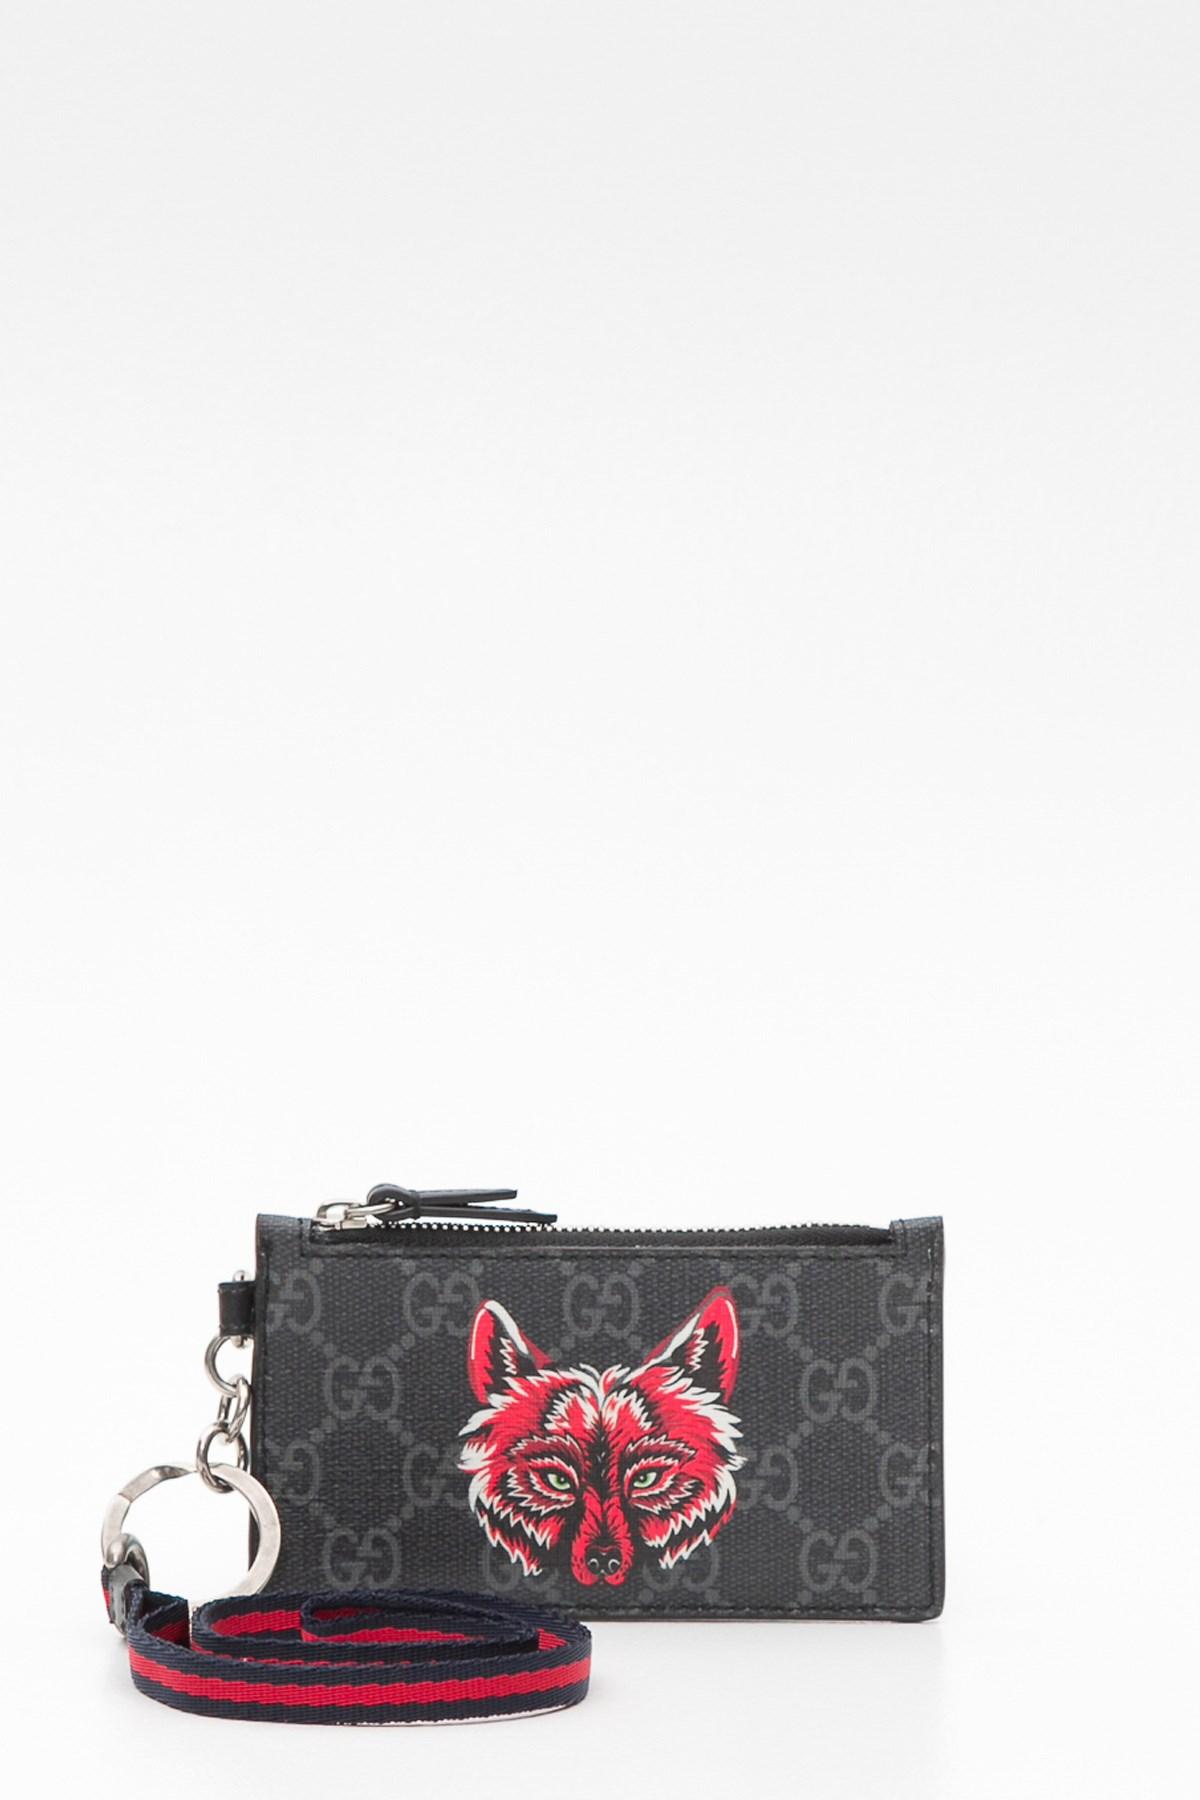 Gucci Leather Bestiary Fox Cardholder 